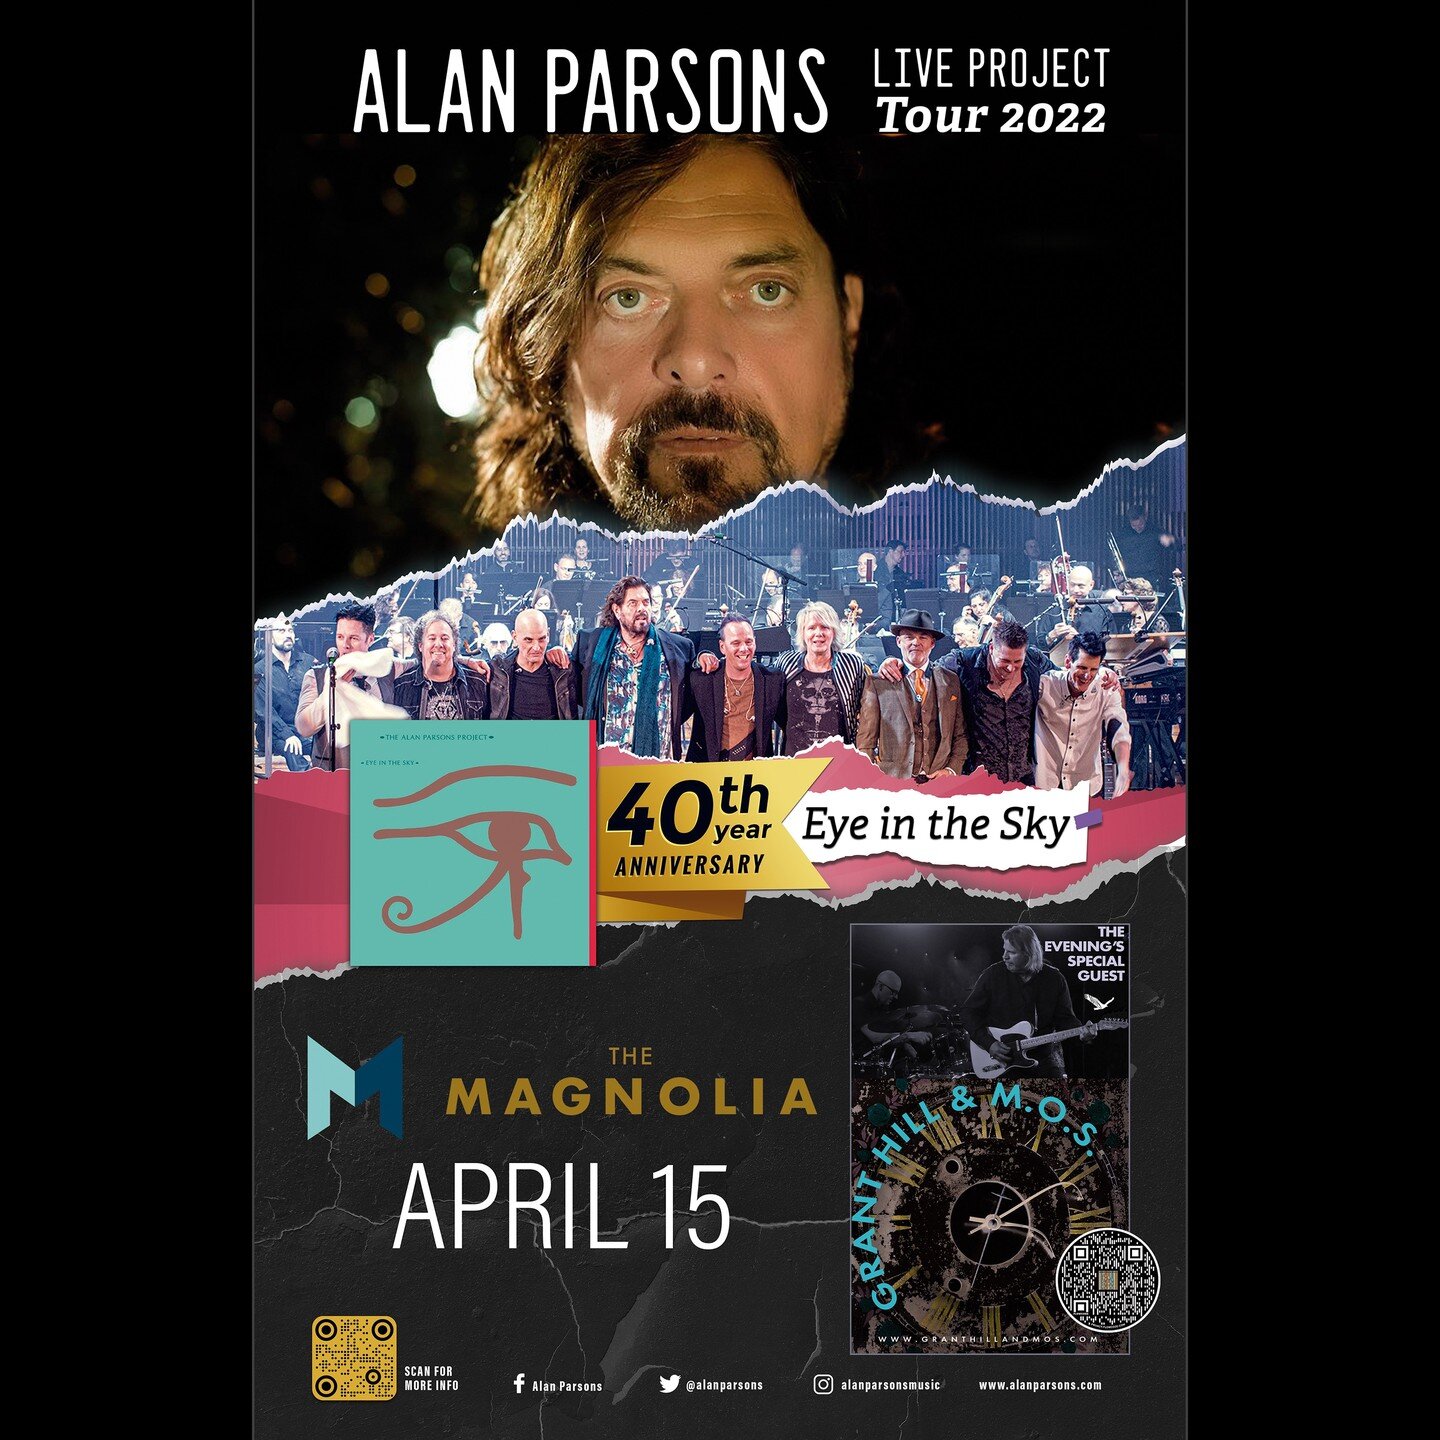 ALAN PARSONS LIVE PROJECT TOUR 2022 AT THE MAGNOLIA
OPENING ACT GRANT HILL &amp; M.O.S.
Friday&mdash;APRIL 15
ADVANCE TICKETS AT https://concerts.livenation.com/the-alan-parsons-live-project-el-cajon-california-04-15-2022/event/0B005C24BCDE11DD

The 